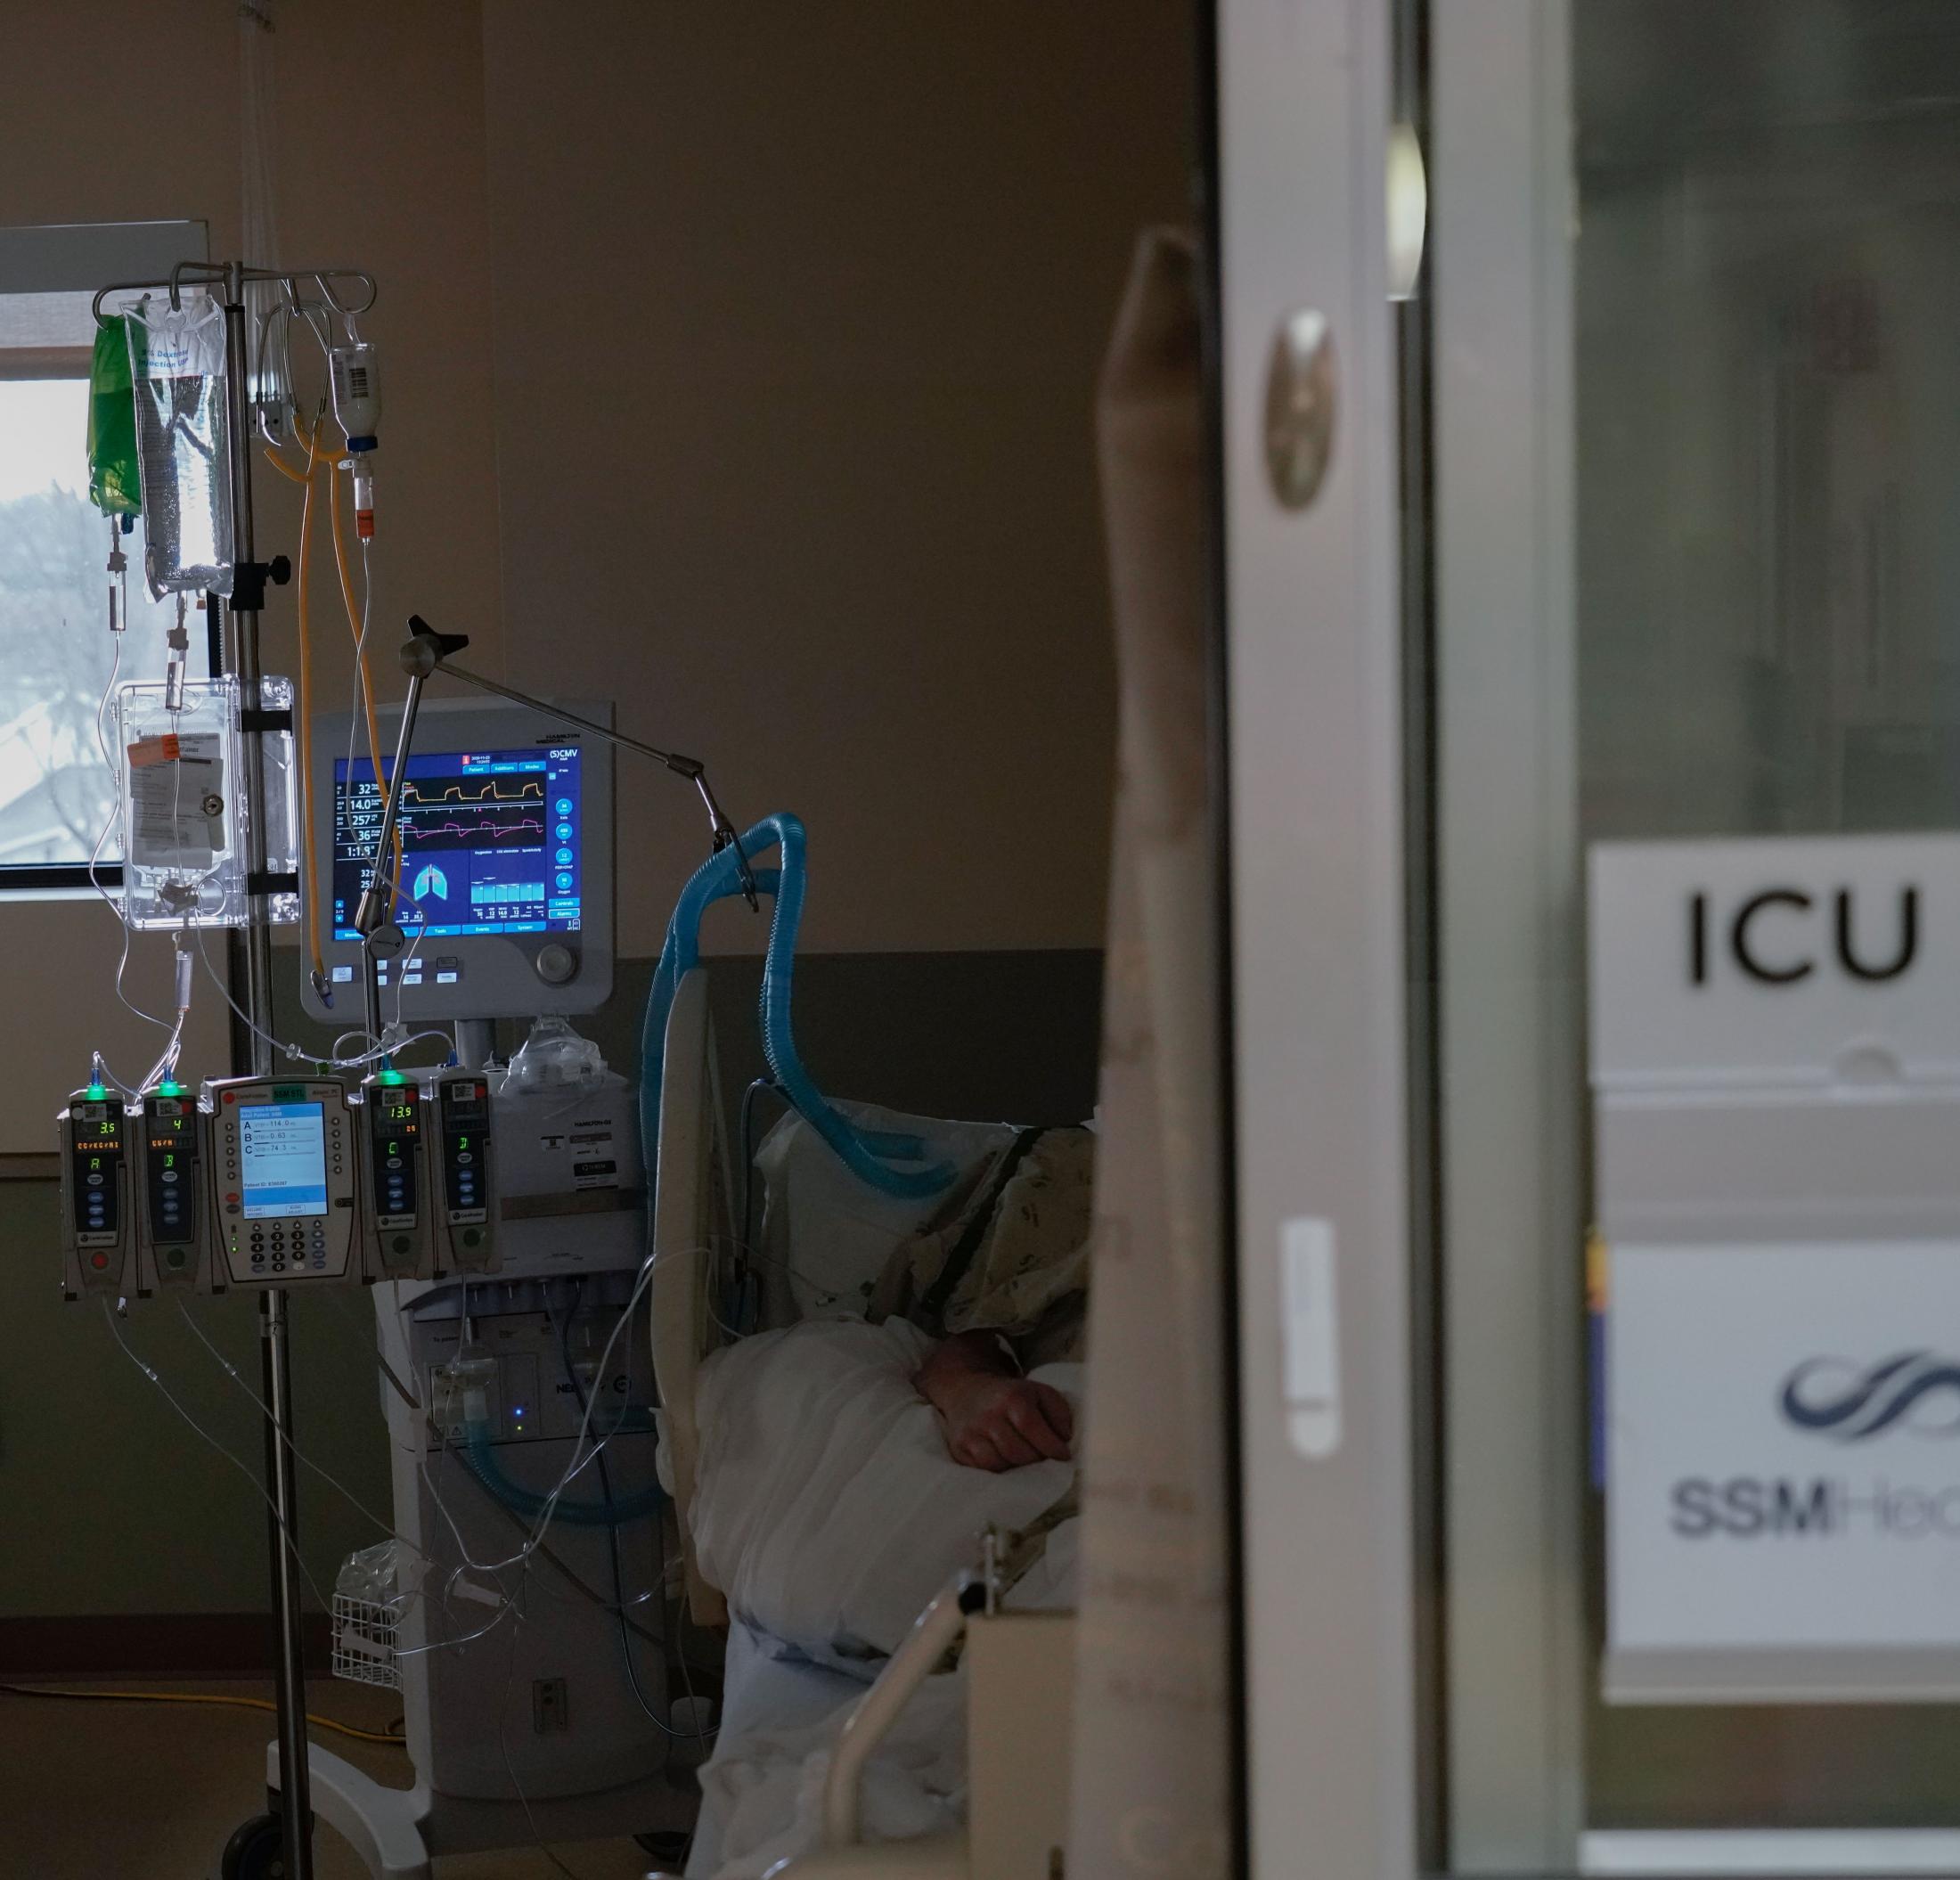 The Missouri ICU - A patient suffering from COVID-19 lies in an ICU bed on...